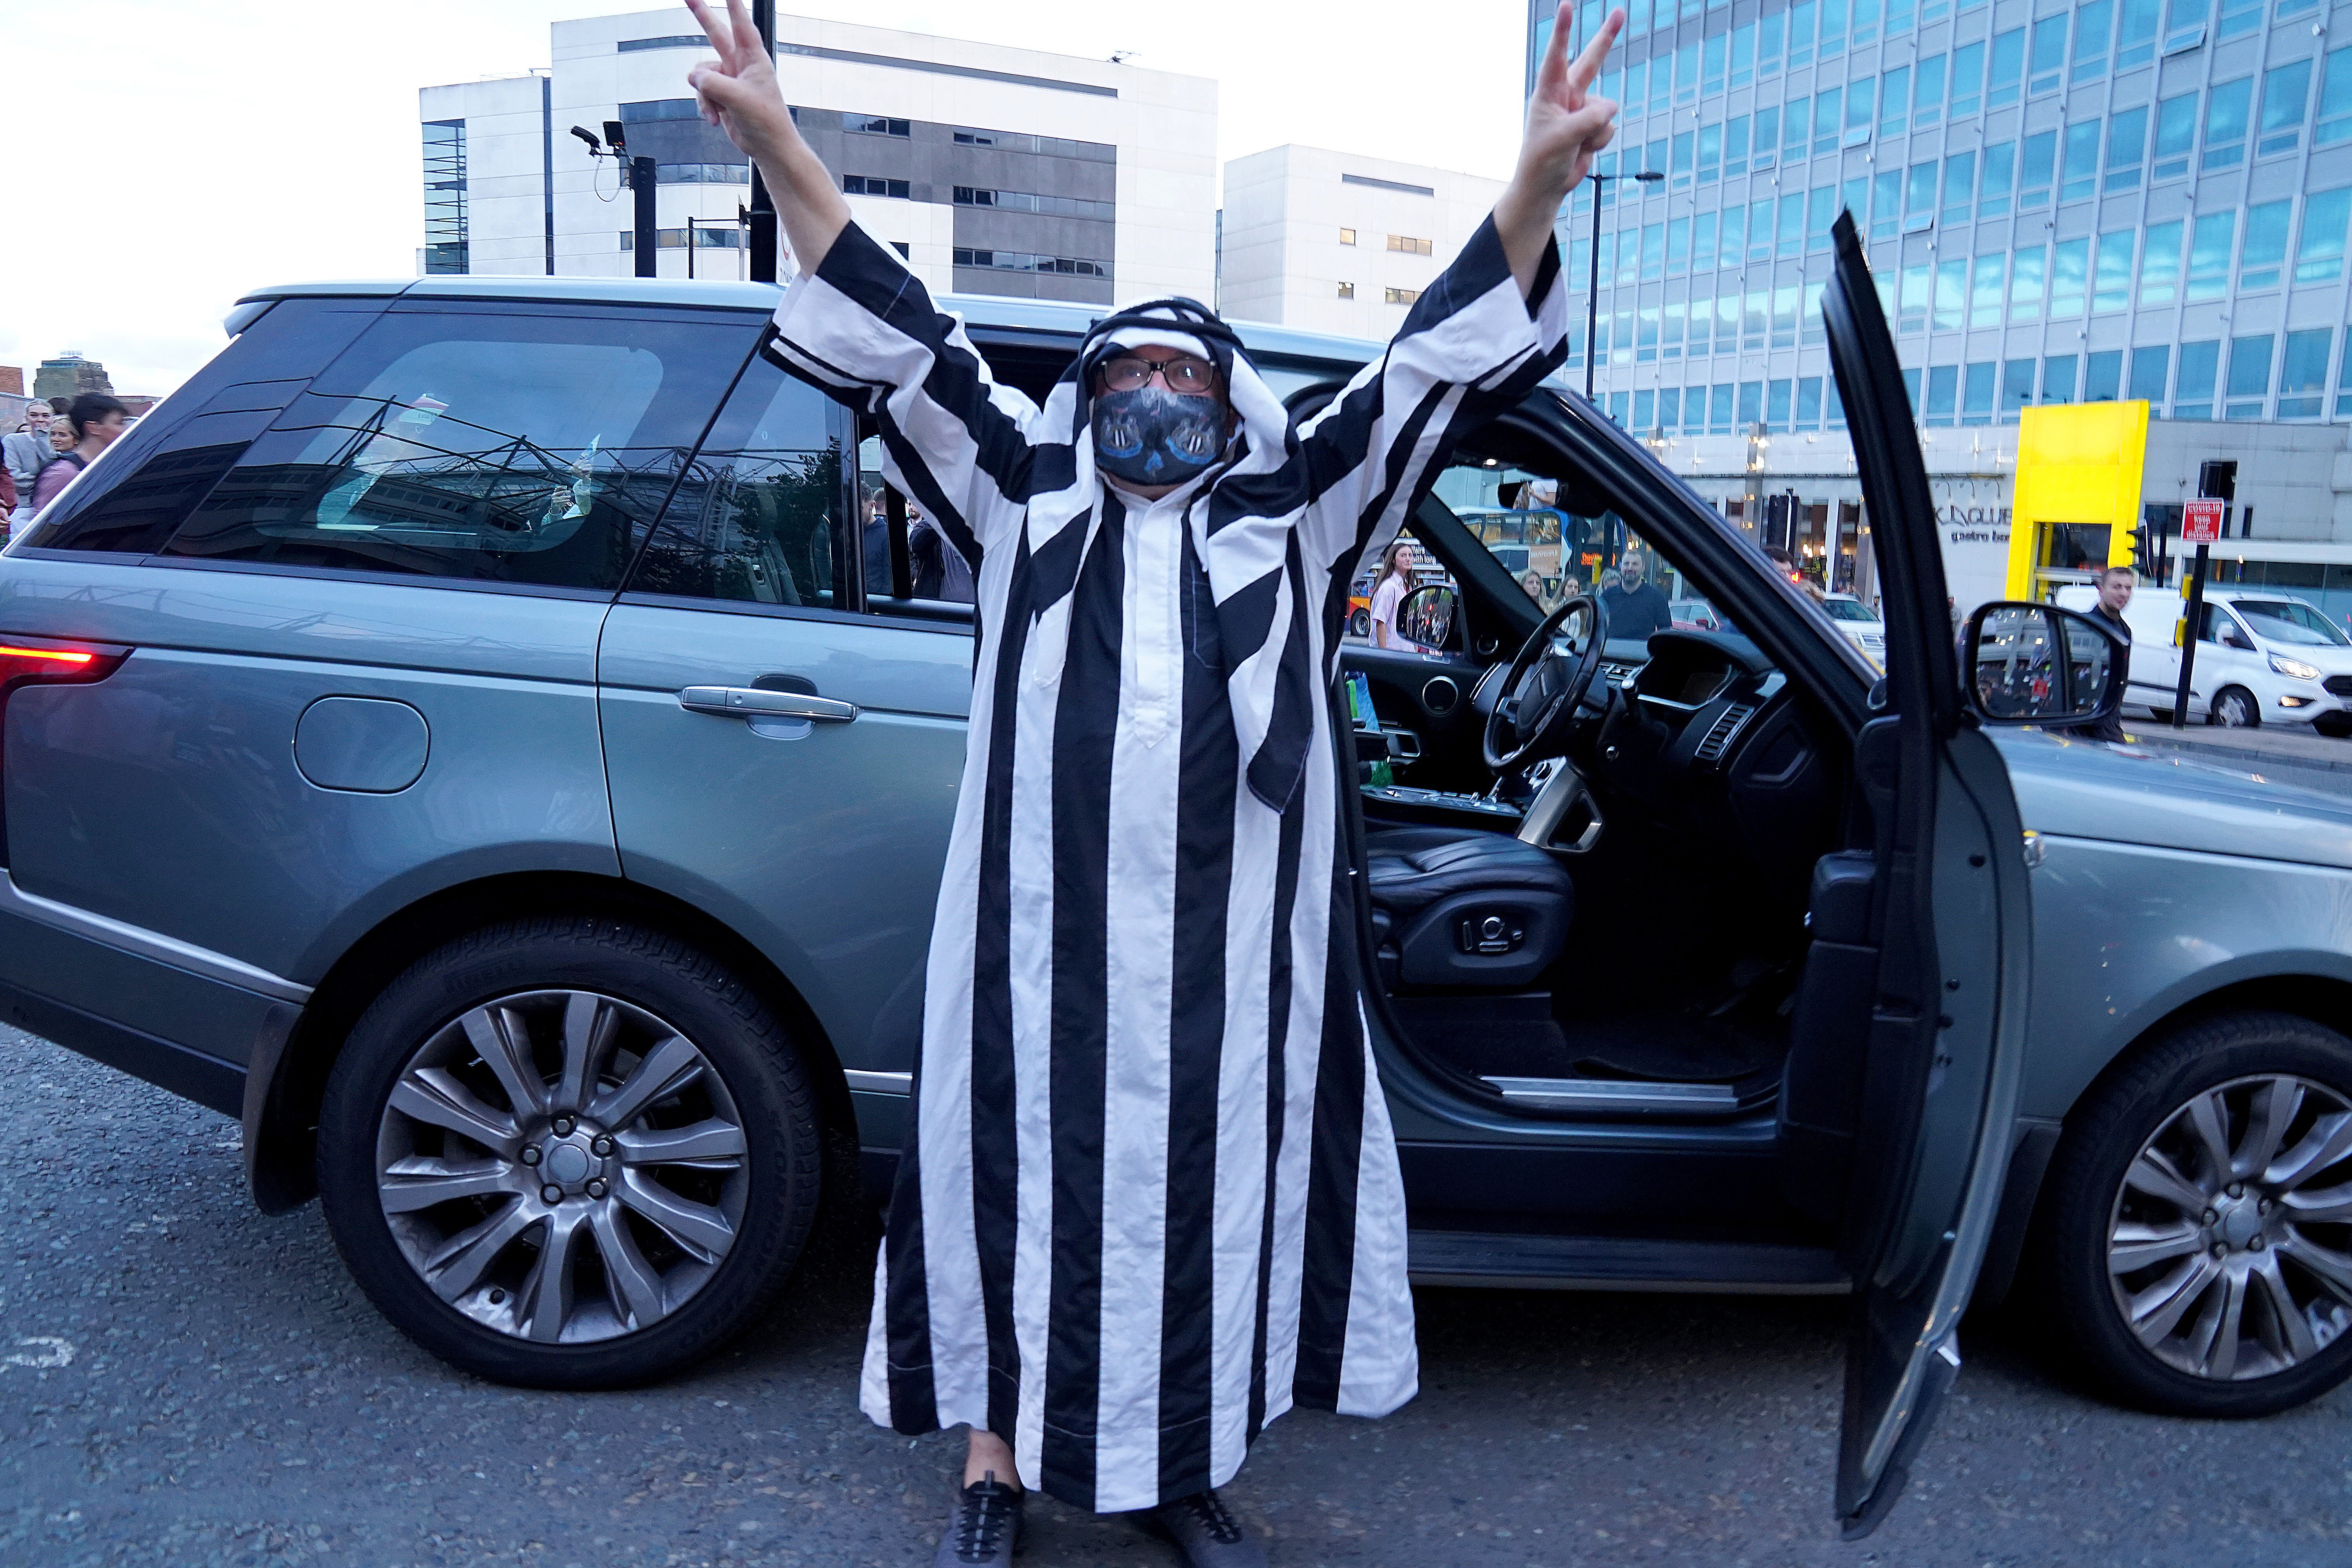 A Newcastle fan shows his joy at the takeover news (Owen Humphreys/PA).